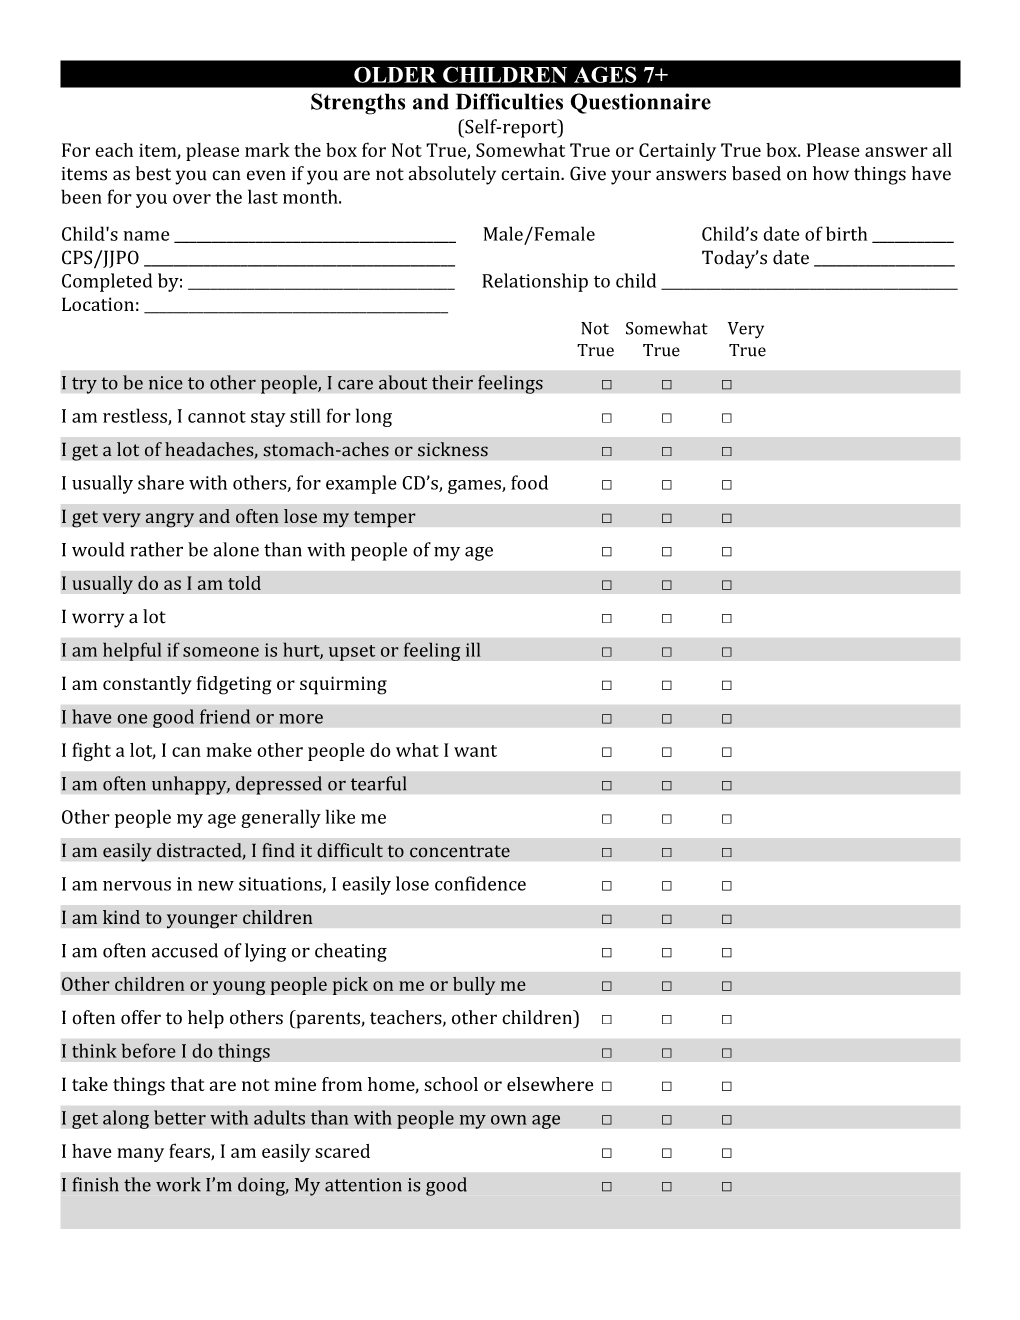 Strengths and Difficulties Questionnaire